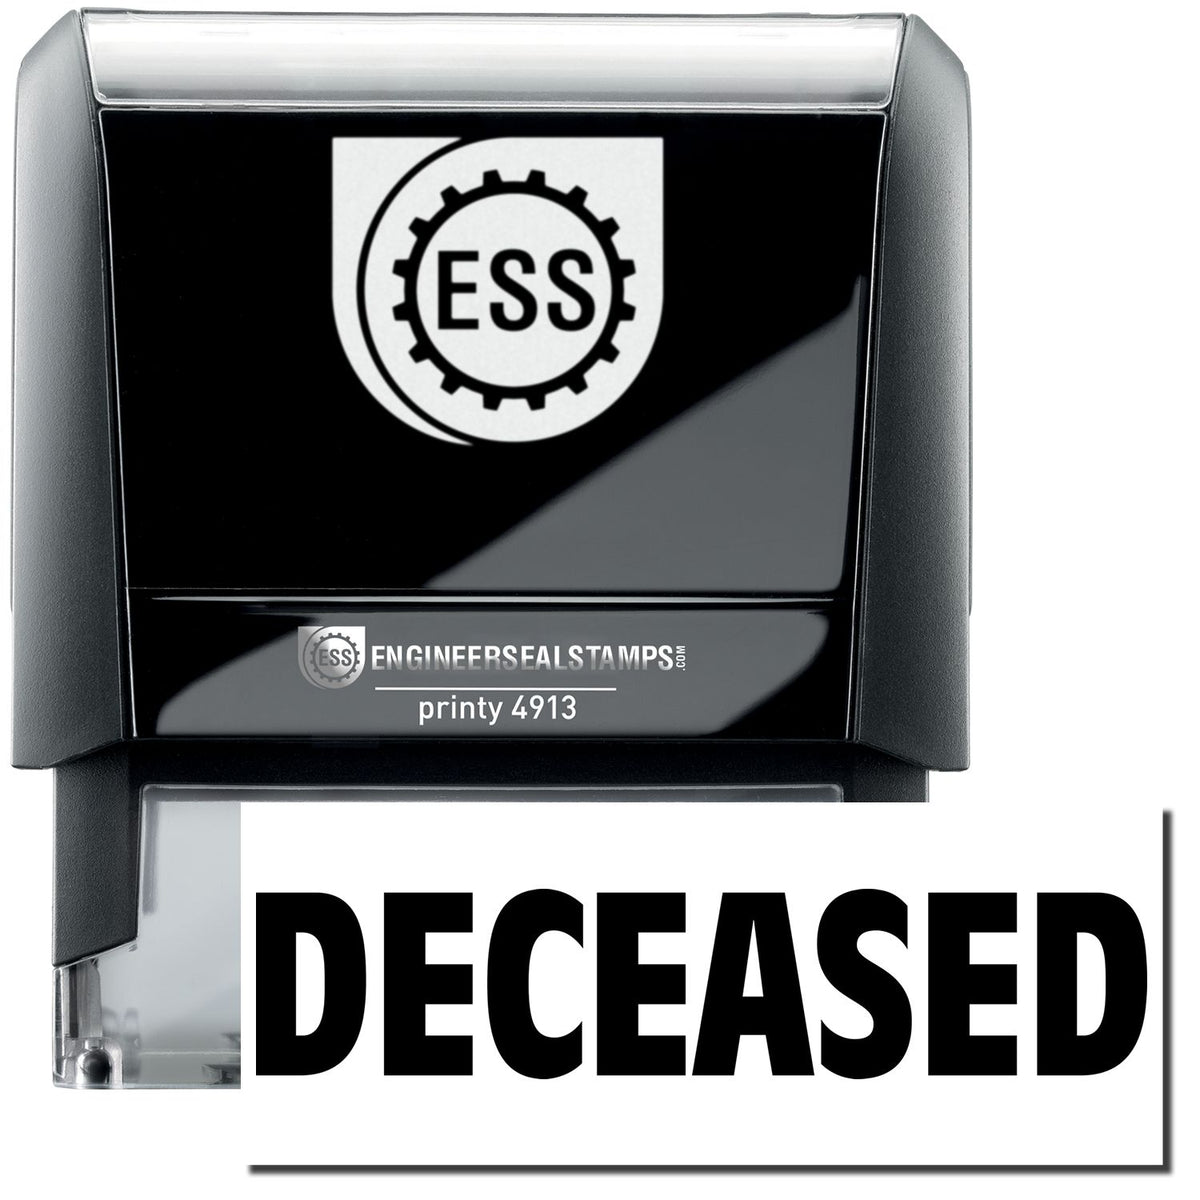 A self-inking stamp with a stamped image showing how the text &quot;DECEASED&quot; in a large font is displayed by it after stamping.